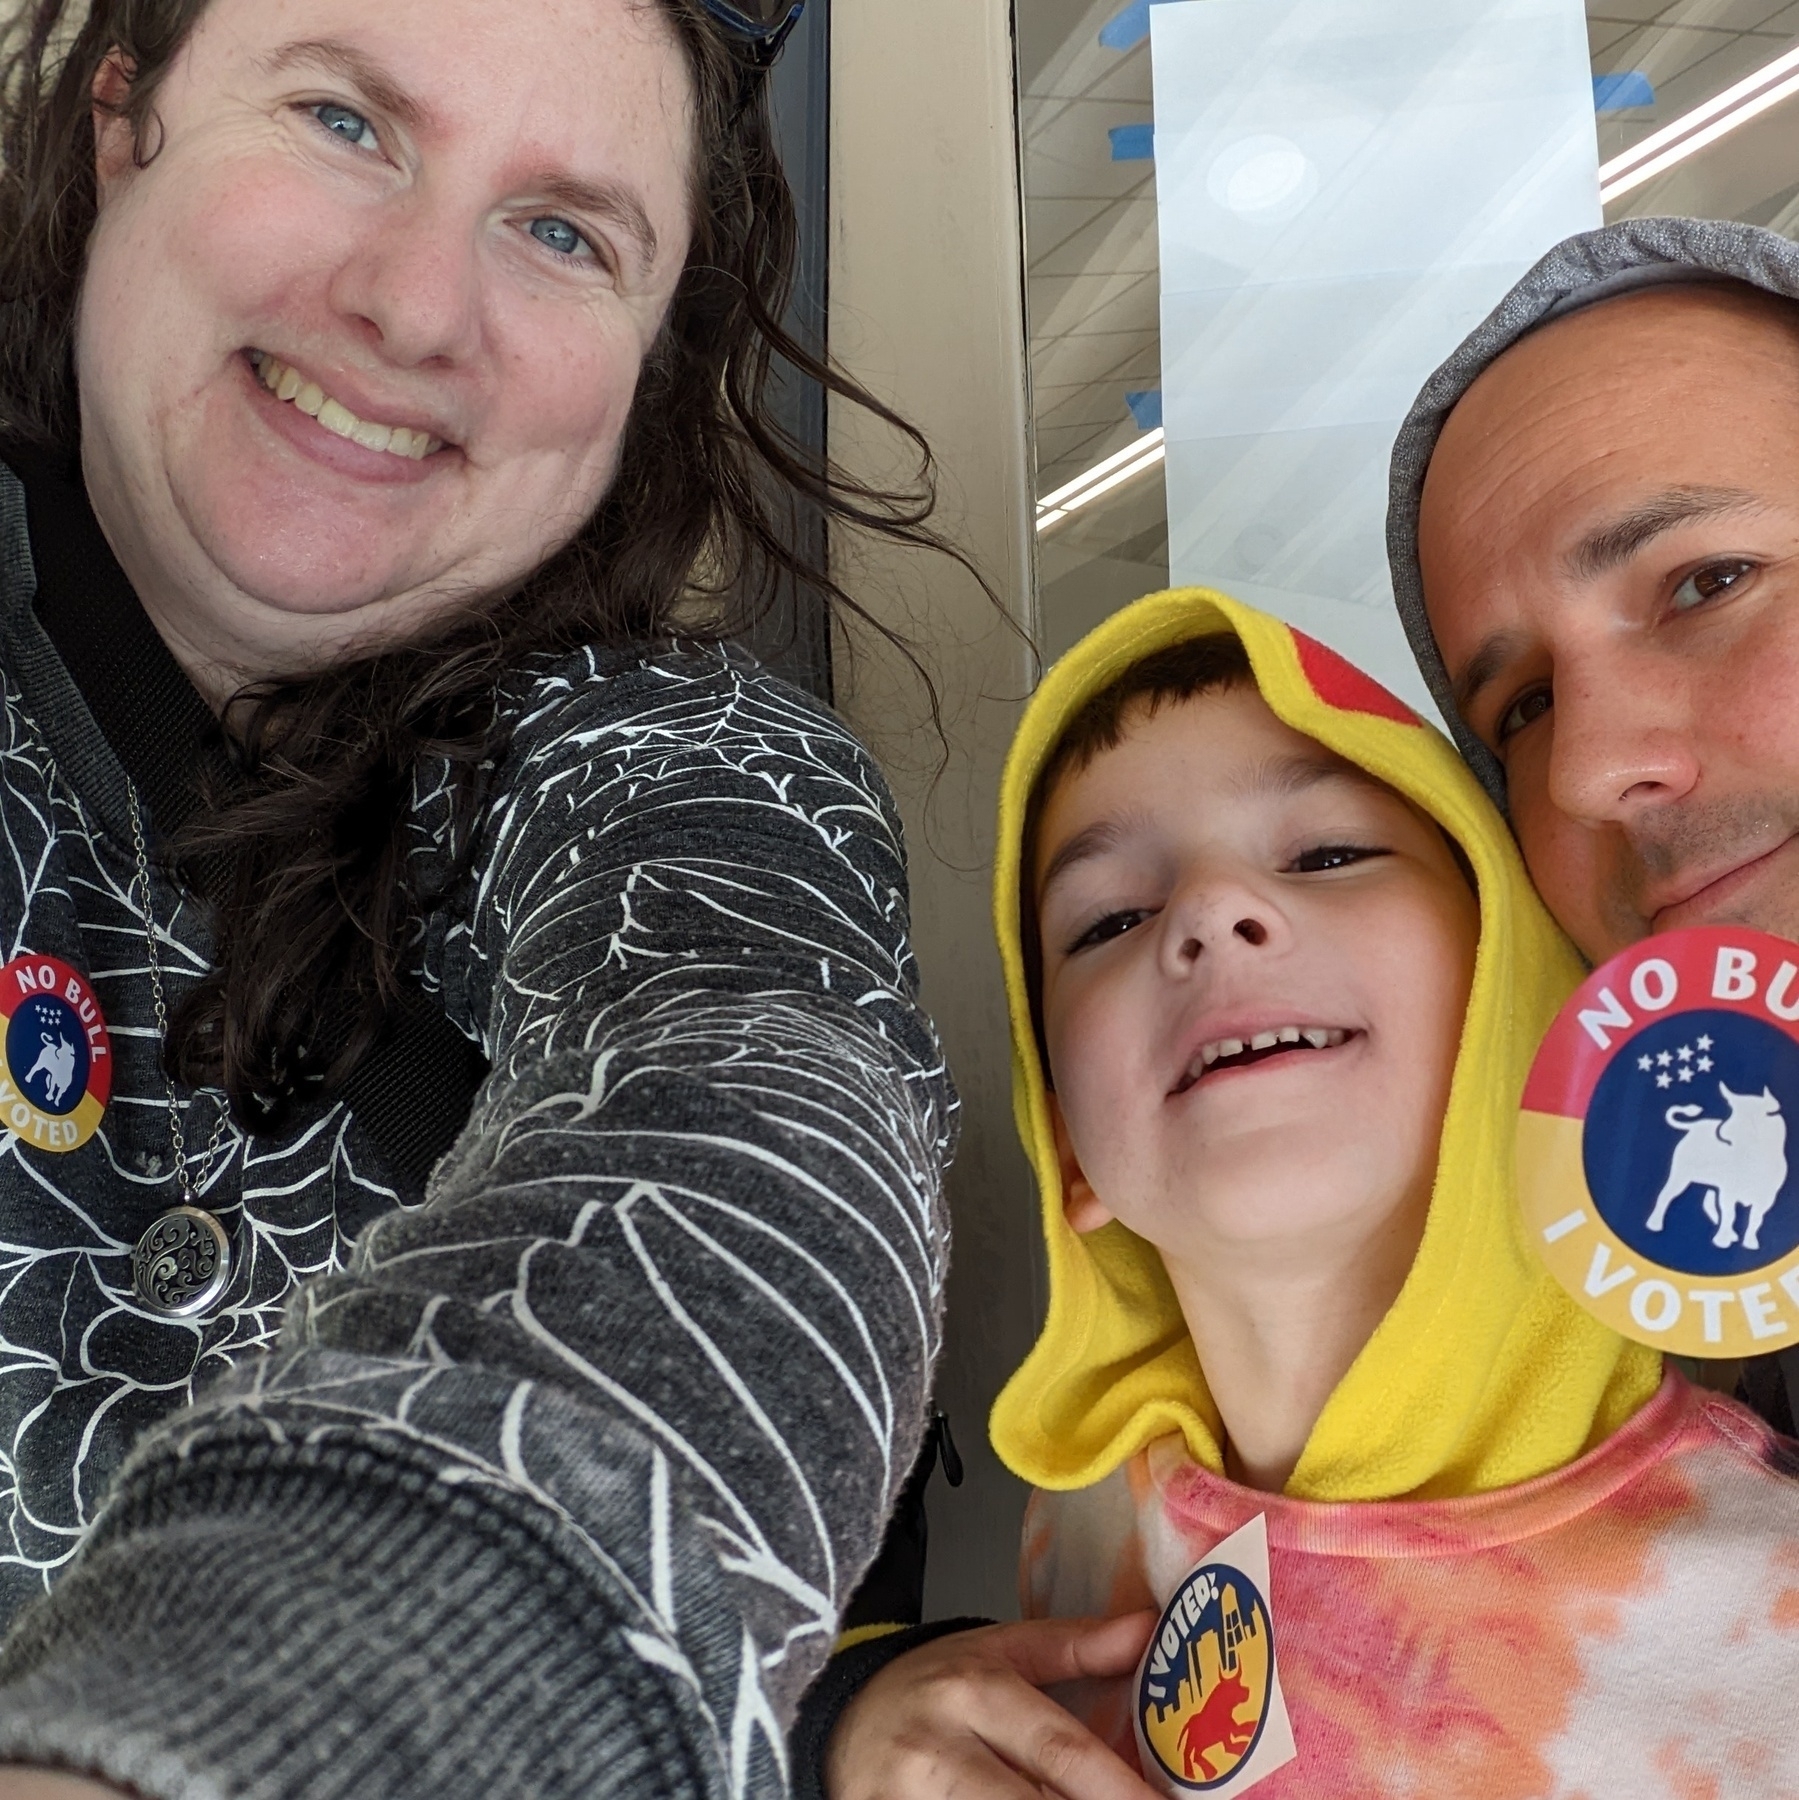 Two adults surround a child. All three of them wear "I voted!" stickers.